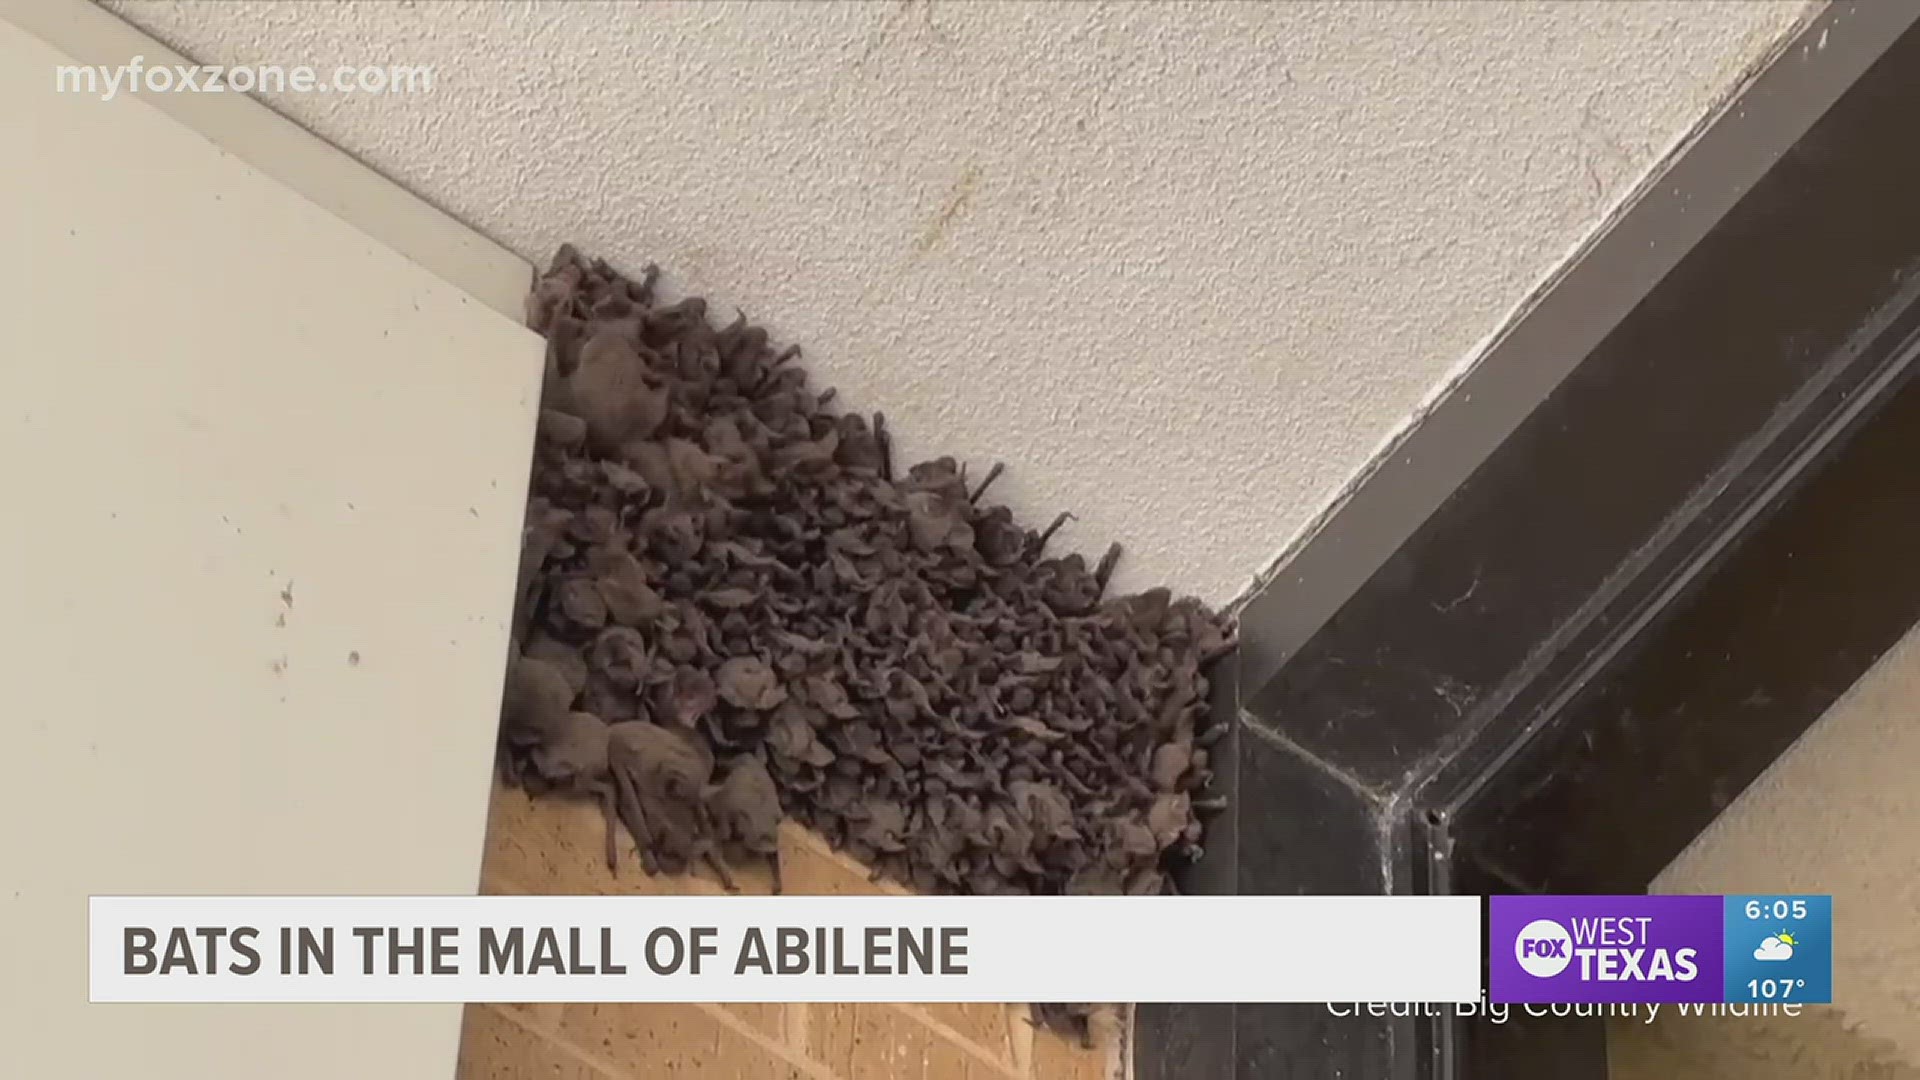 Big Country Wildlife Rehabilitation Centers and A.P.D's Animal Outreach Team partnered with Bat World Sanctuary to humanely evict bats from the Mall of Abilene.